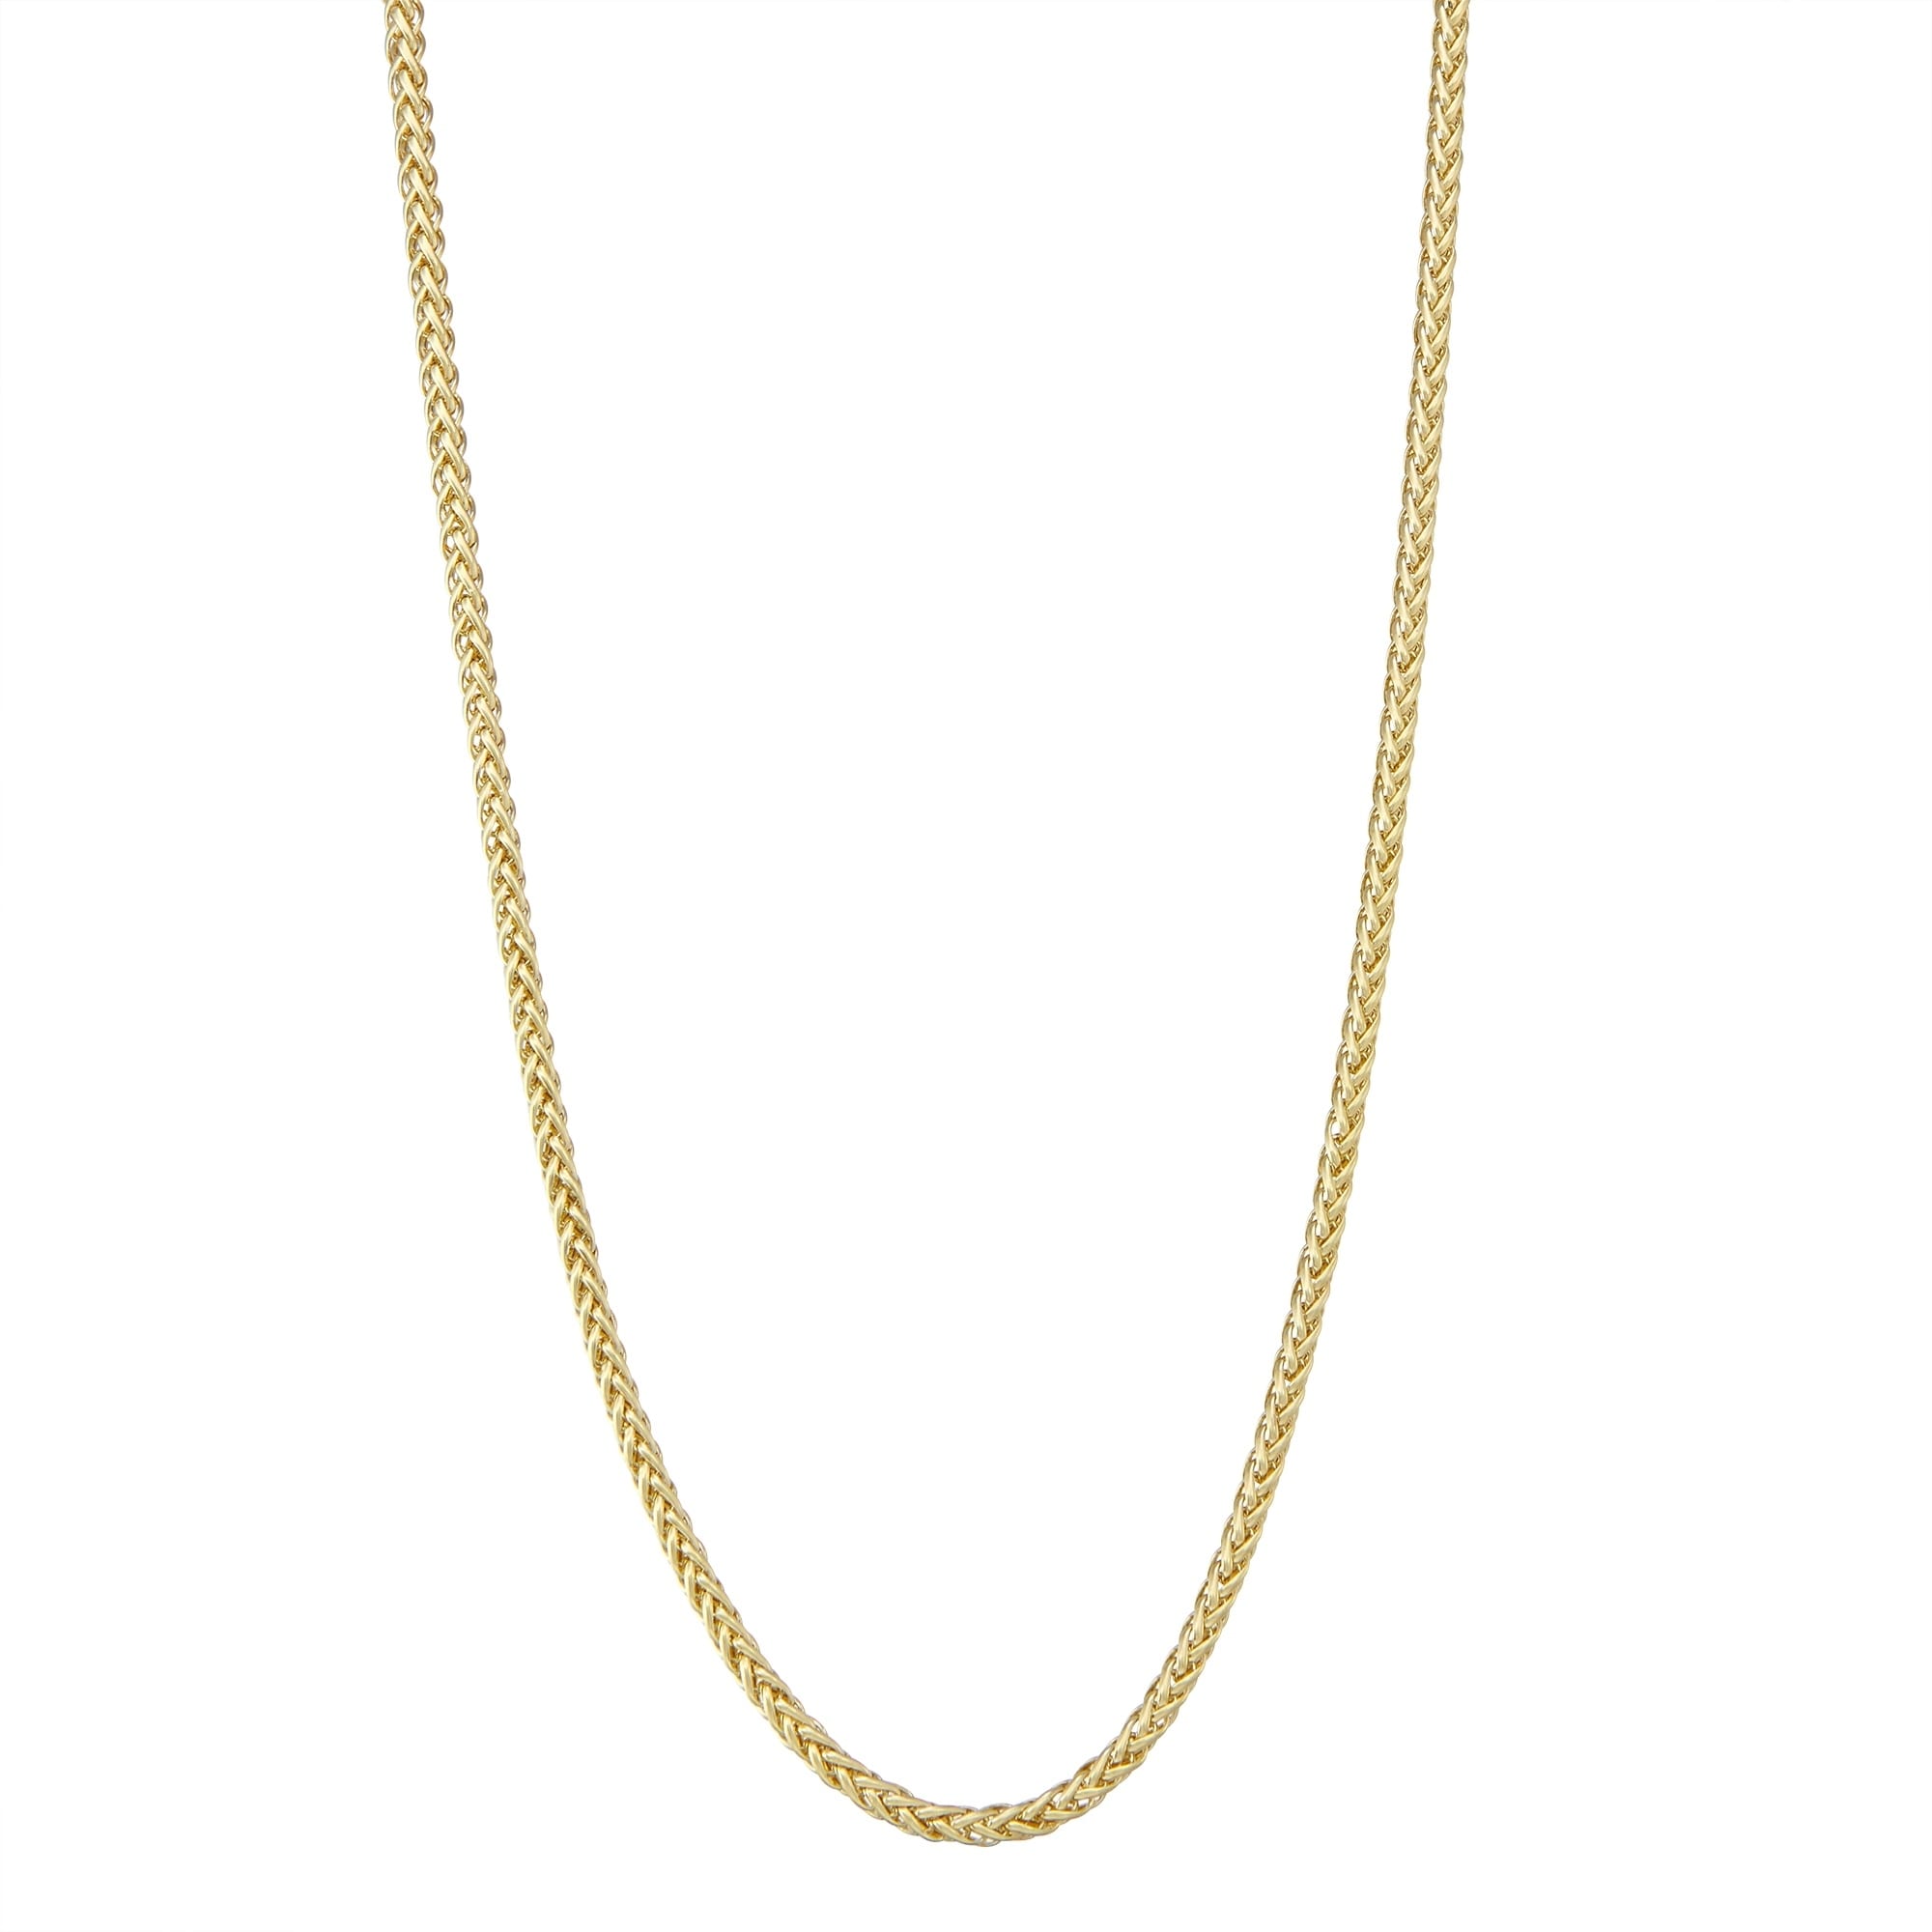 14k Gold Men S 3 2mm Wheat Chain Necklace By Gioelli Designs On Sale Overstock 29739307